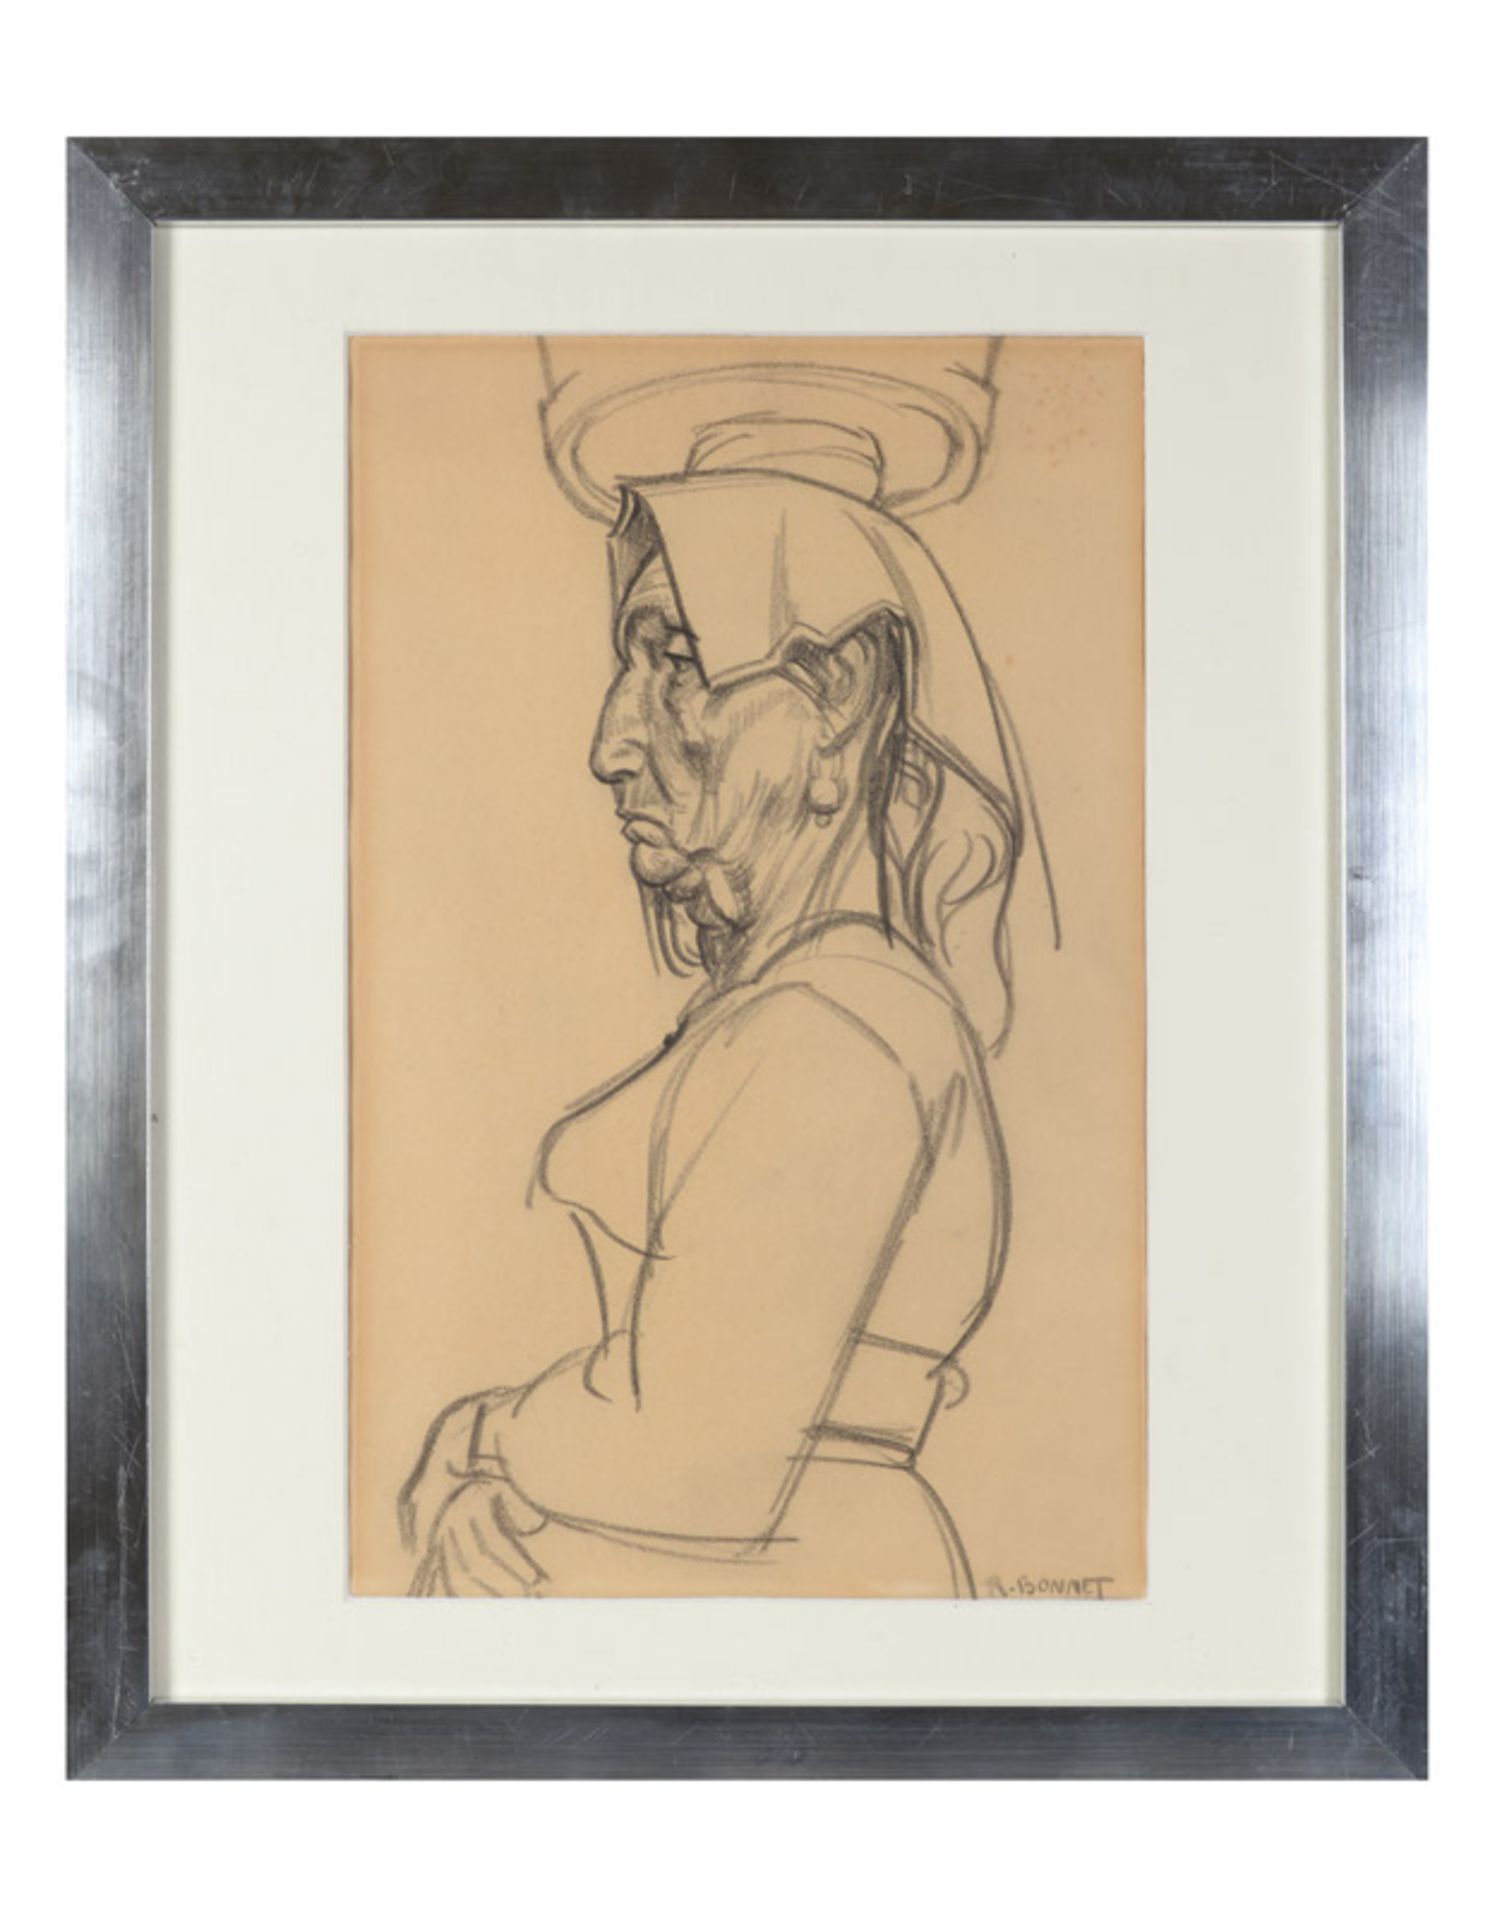 Rudolf Bonnet (1895-1978), 'Italian woman', signed lower right, charcoal on paper, 42 x 26 cm. - Image 2 of 2